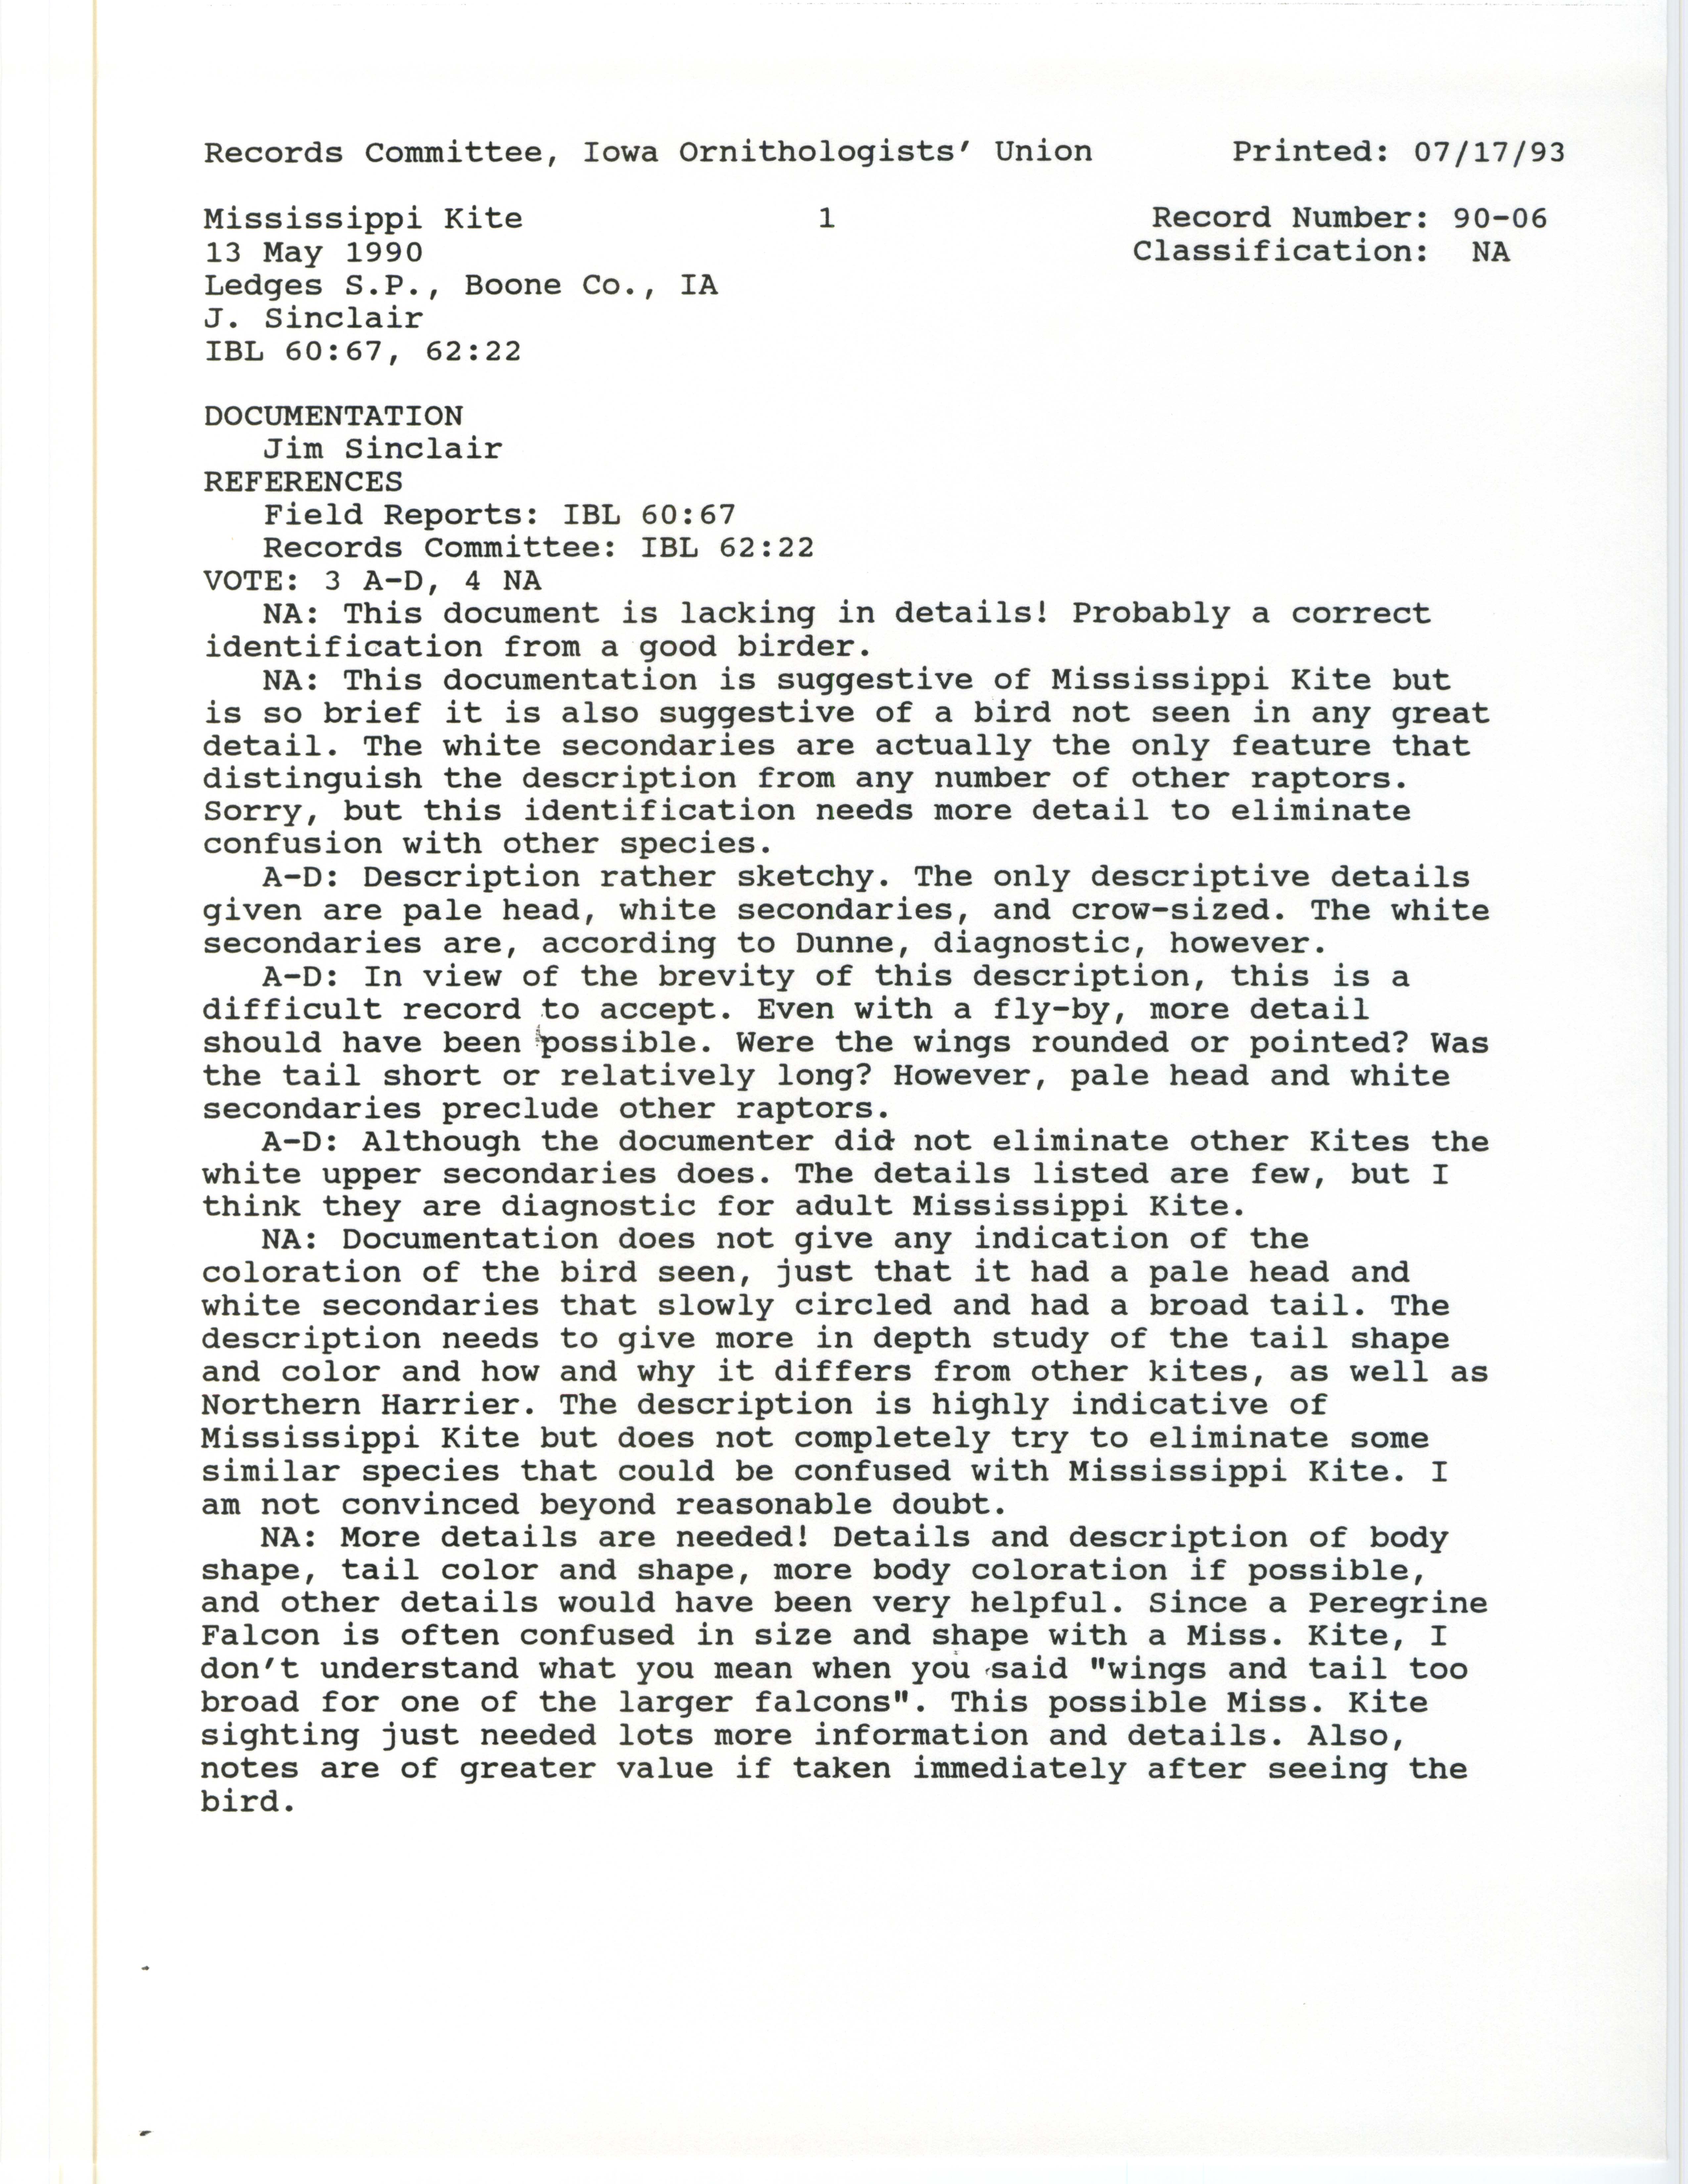 Records Committee review for rare bird sighting of Mississippi Kite at Ledges State Park, 1990